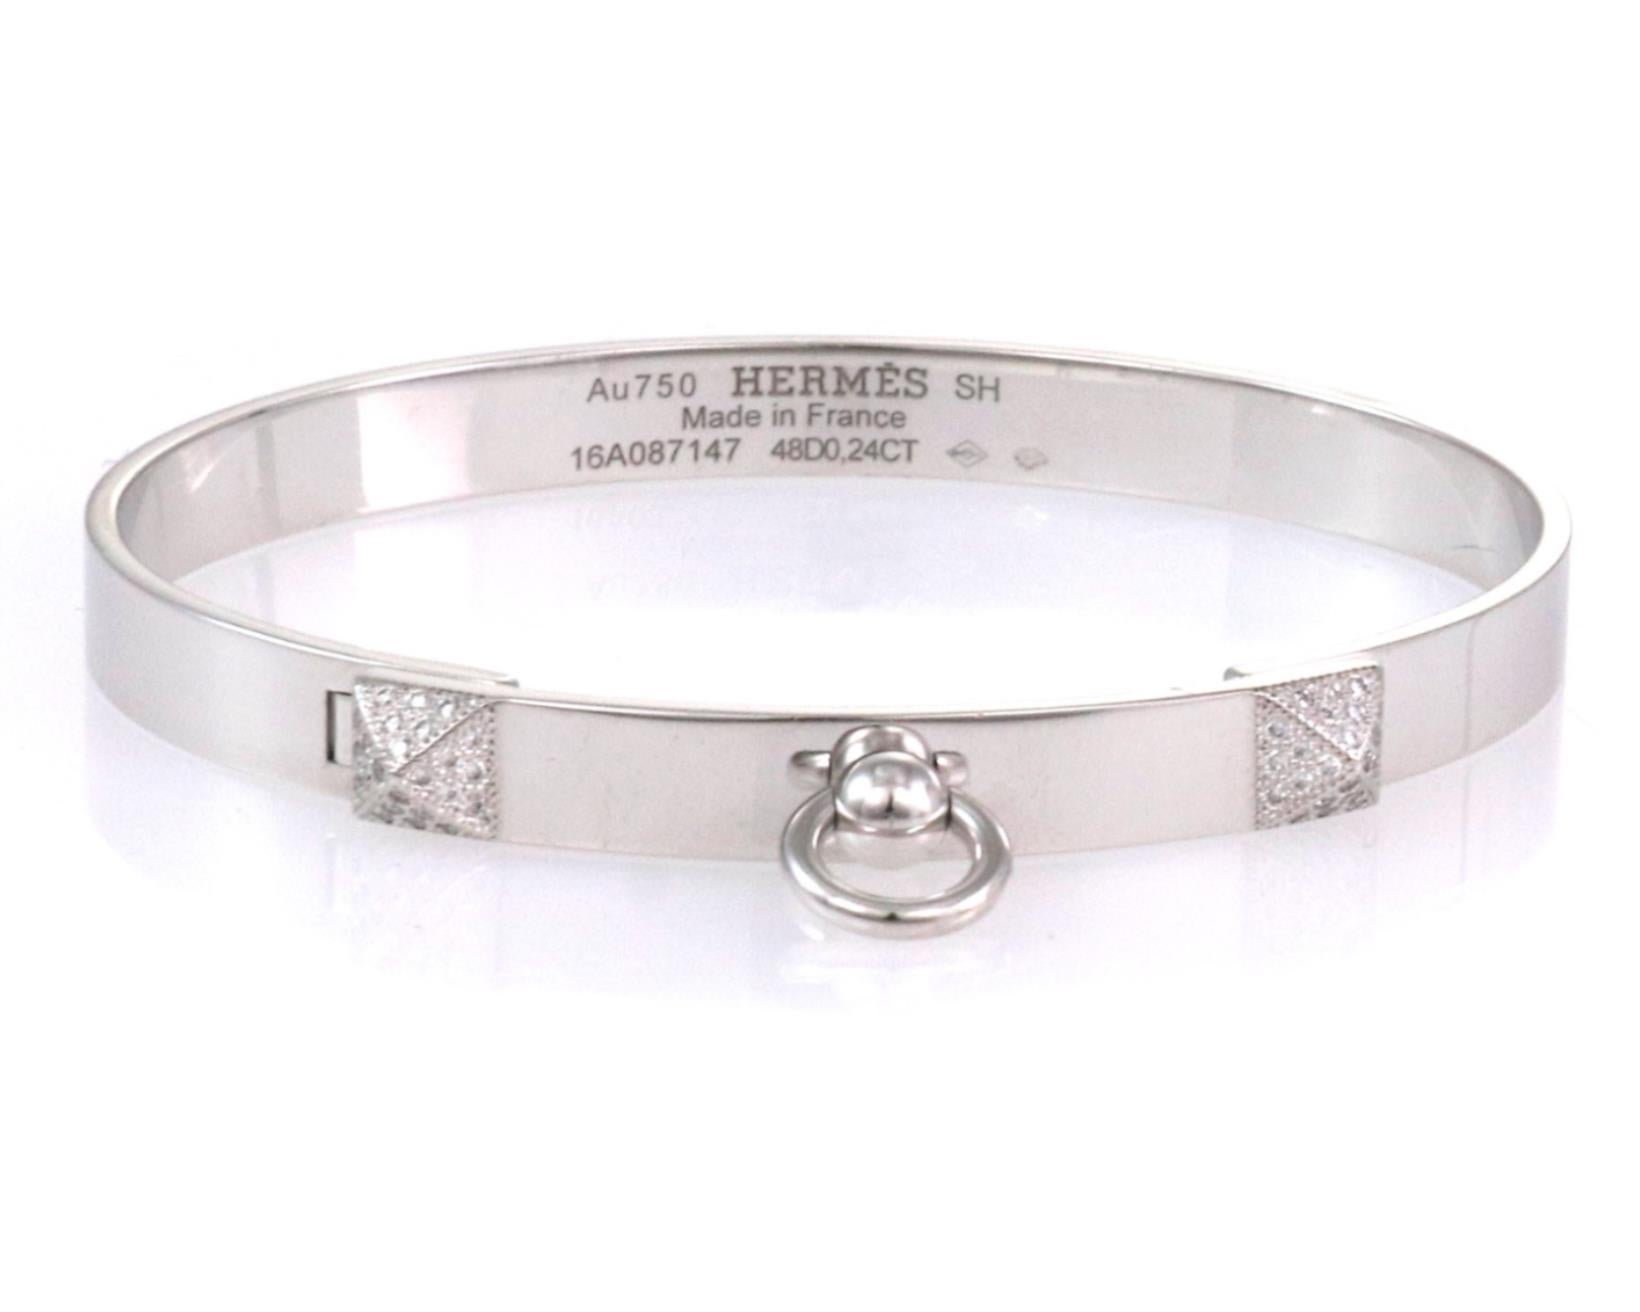 This stunning Collier de Chein collection is by Hermes, it features an authentic bangle crafted from 18k white gold with a high polished finish featuring a 6mm wide band. The front of the bangle has two small pyramid like design set with diamond and